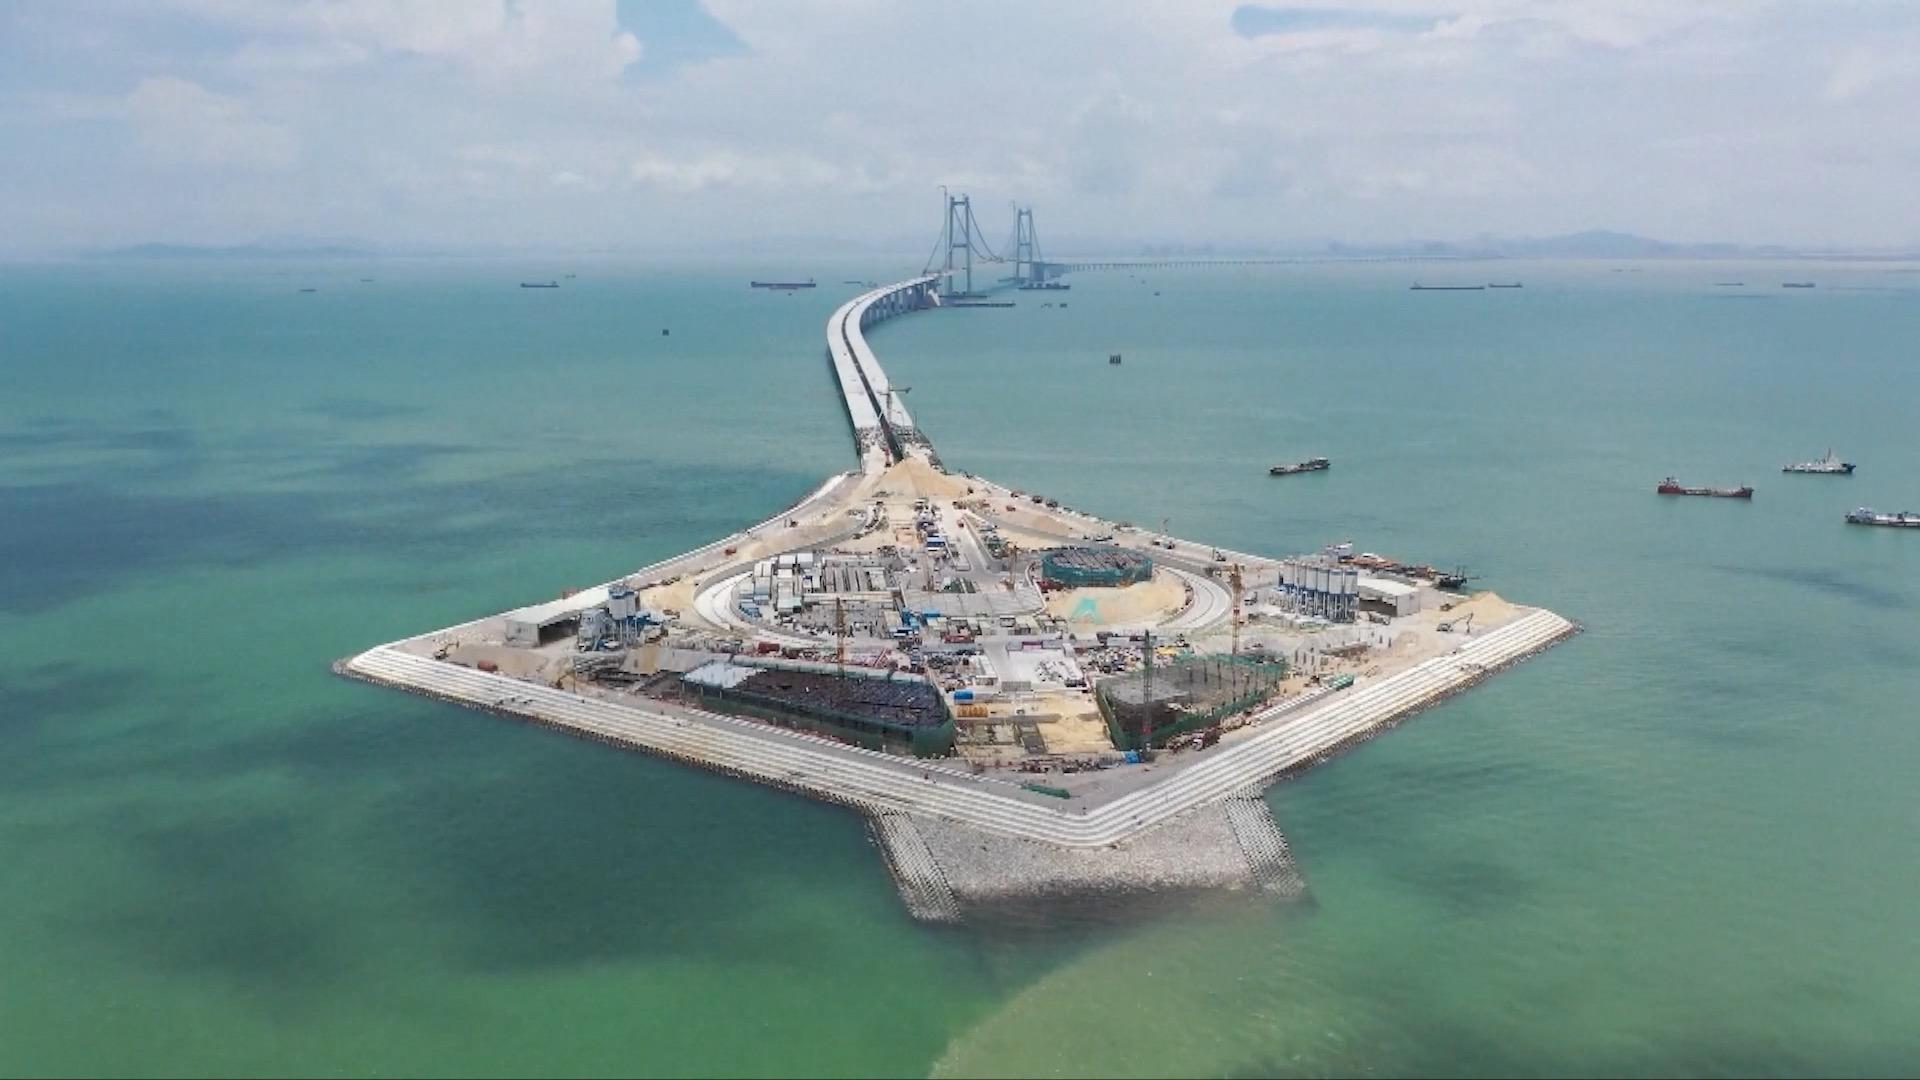 Main structure of artificial island for mega subsea link completed